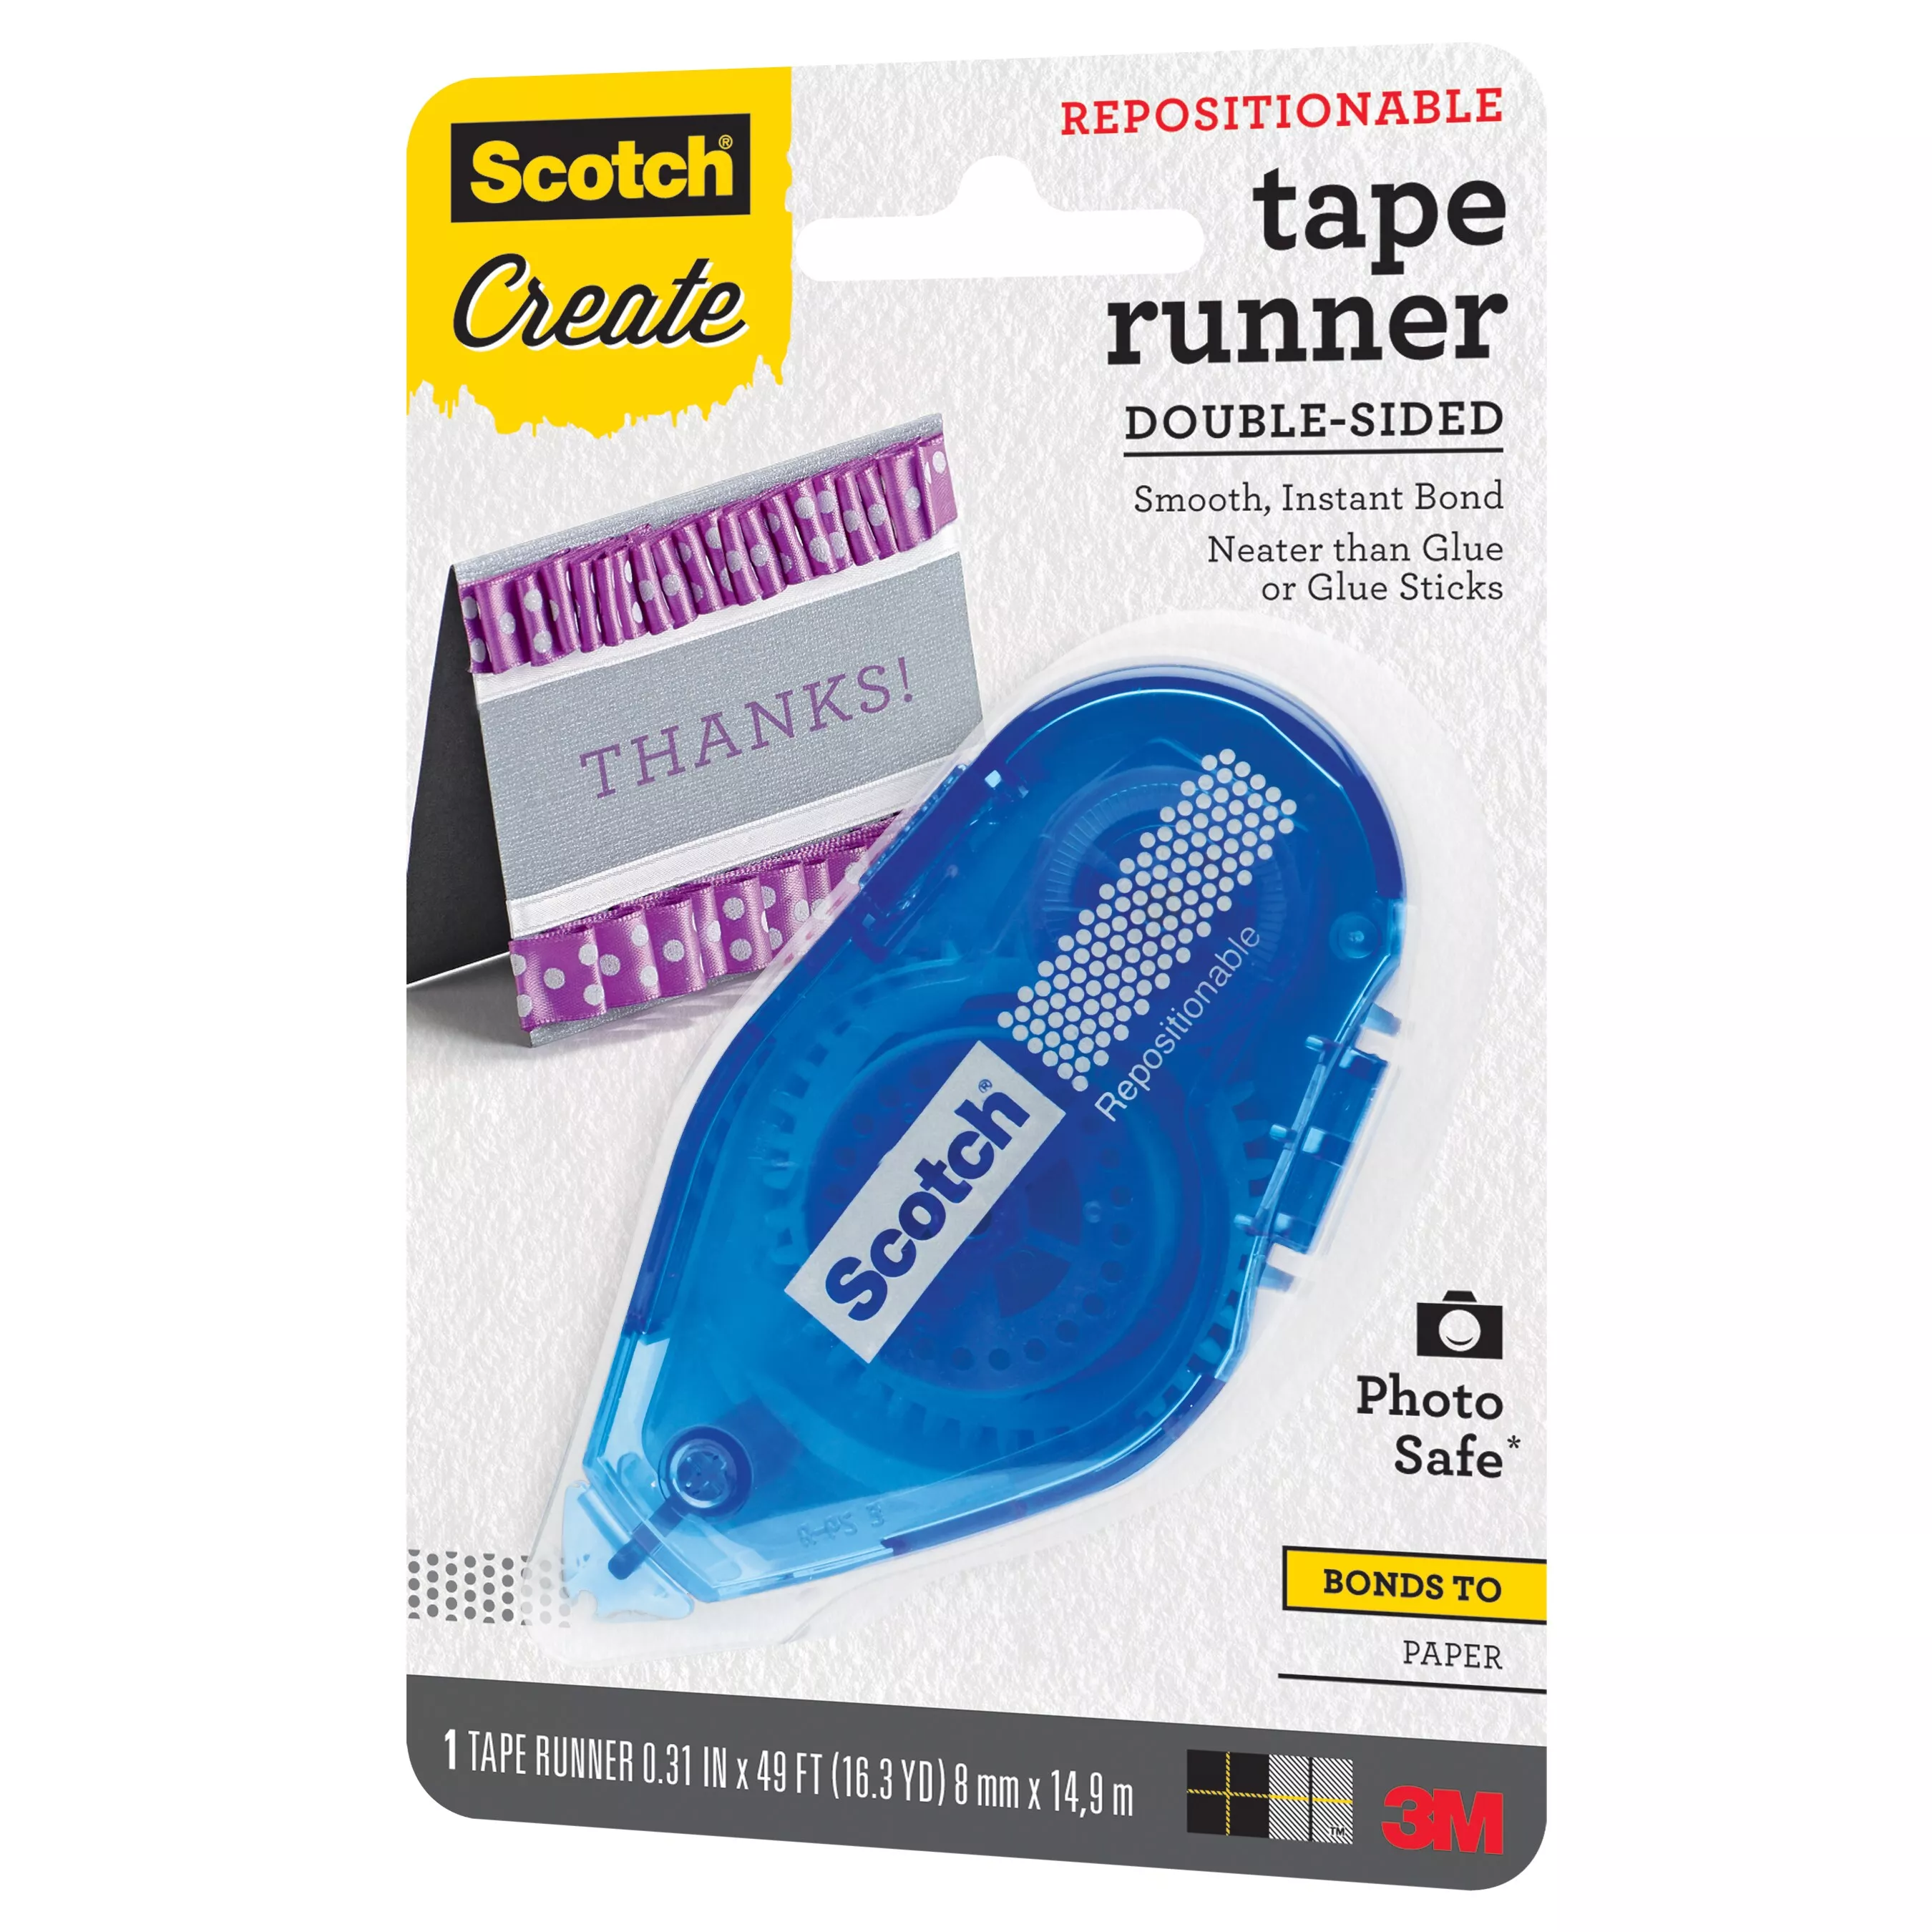 UPC 00051141389868 | Scotch® Tape Runner Repositionable 055-RPS-CFT